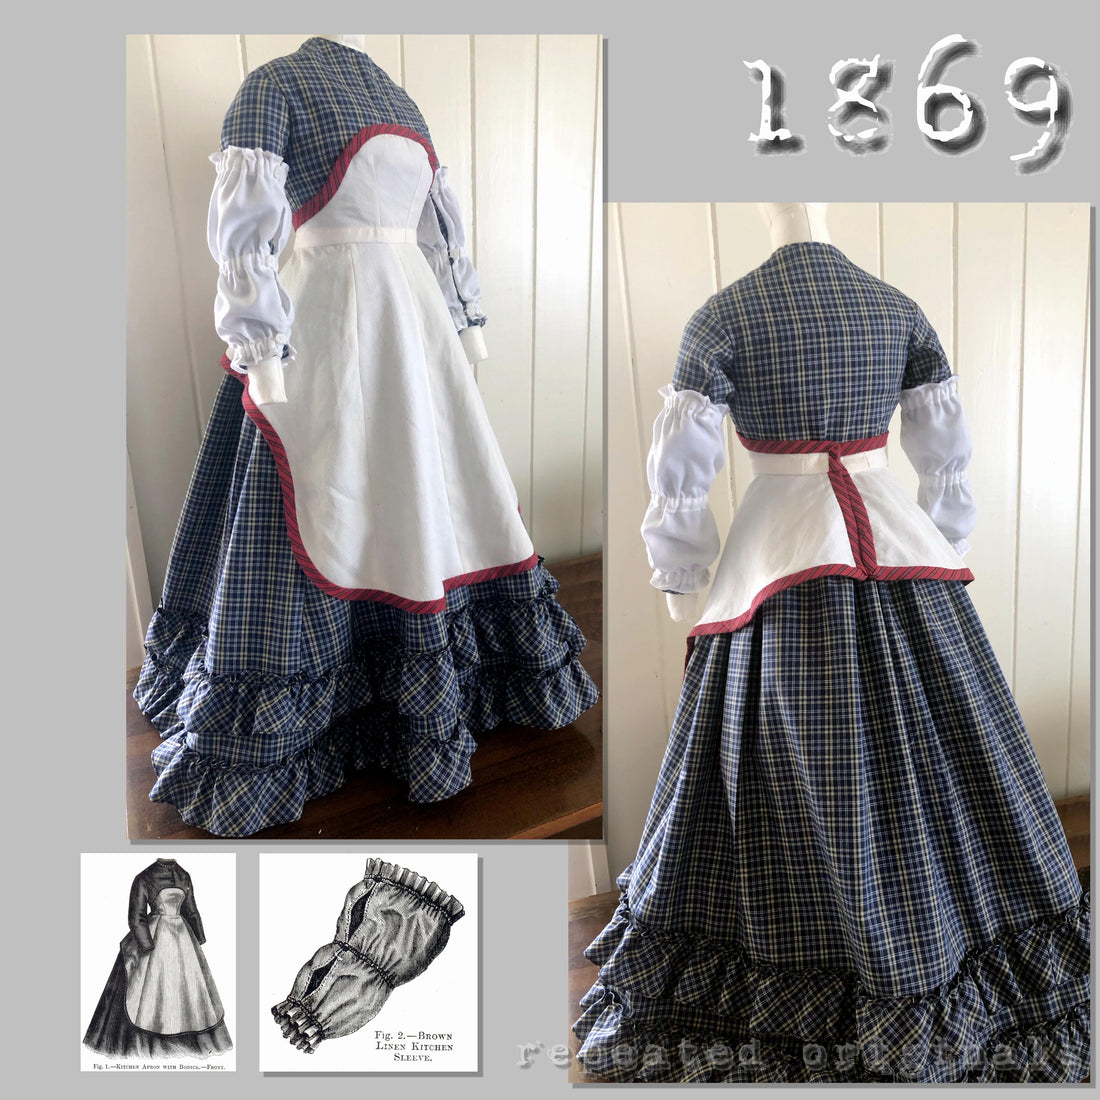 1869 Kitchen Apron and Sleeves Toile (A90324 20)